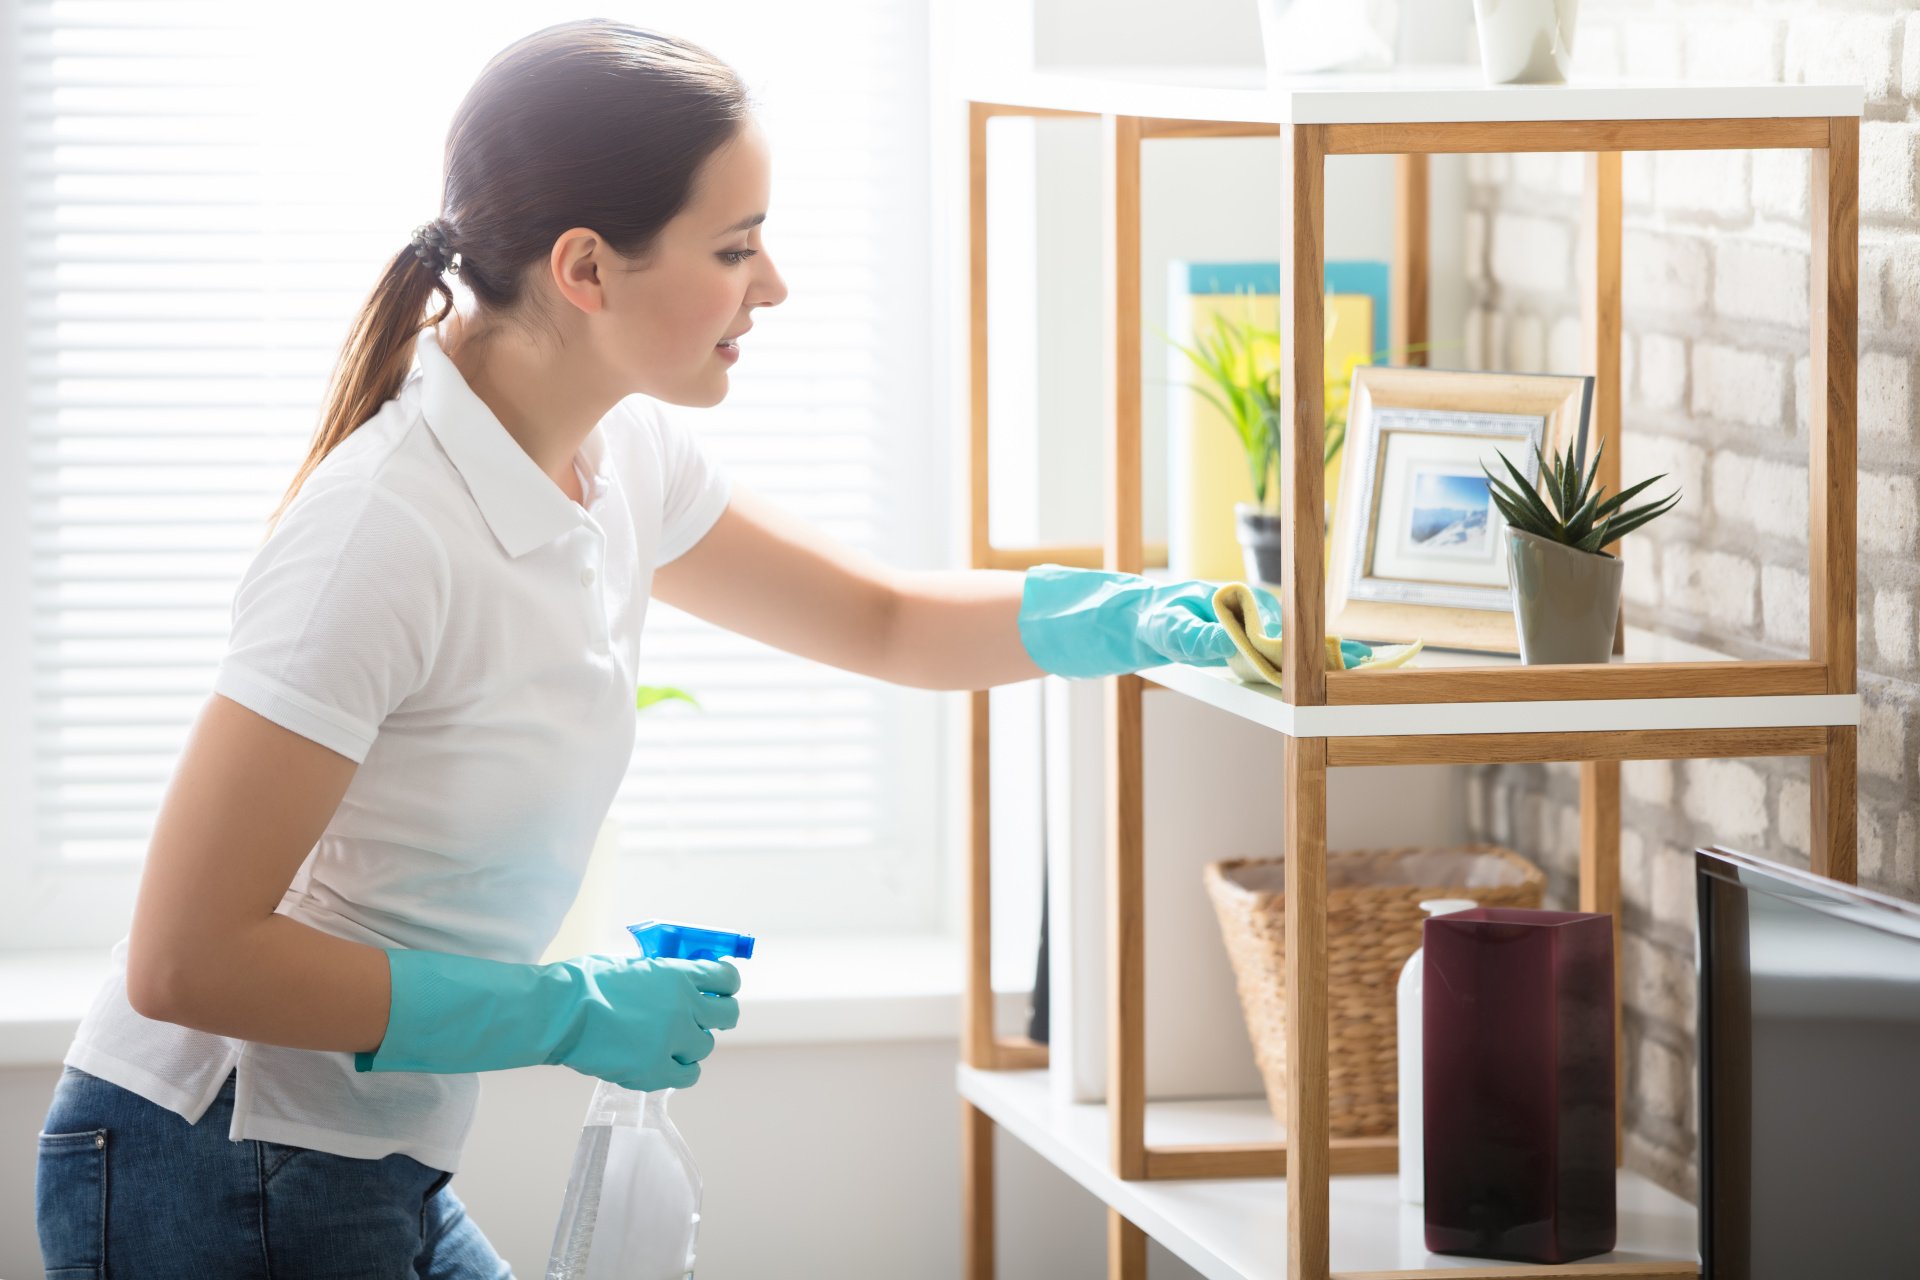 What Should I Look For When Hiring A Cleaning Service?